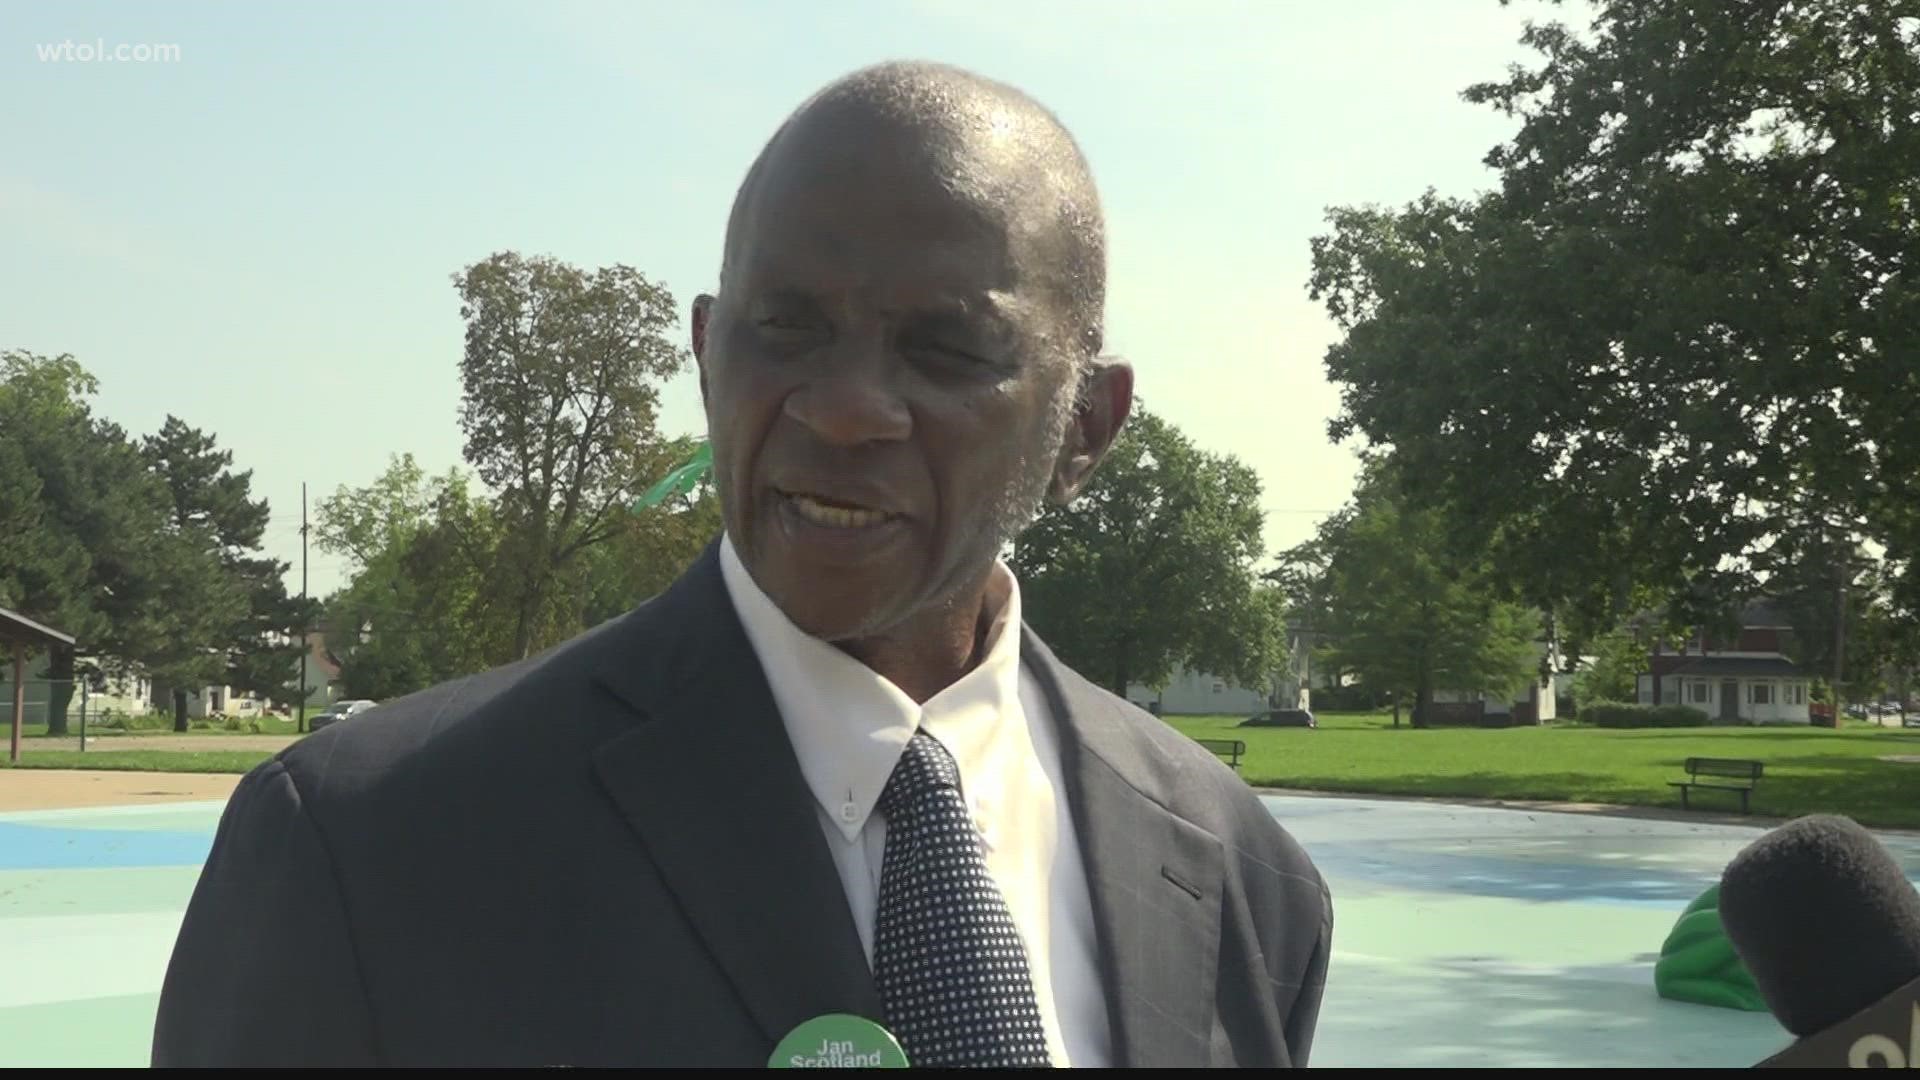 Former Toledo Mayors Mike Bell and Donna Owens chose Savage Park to address their concern